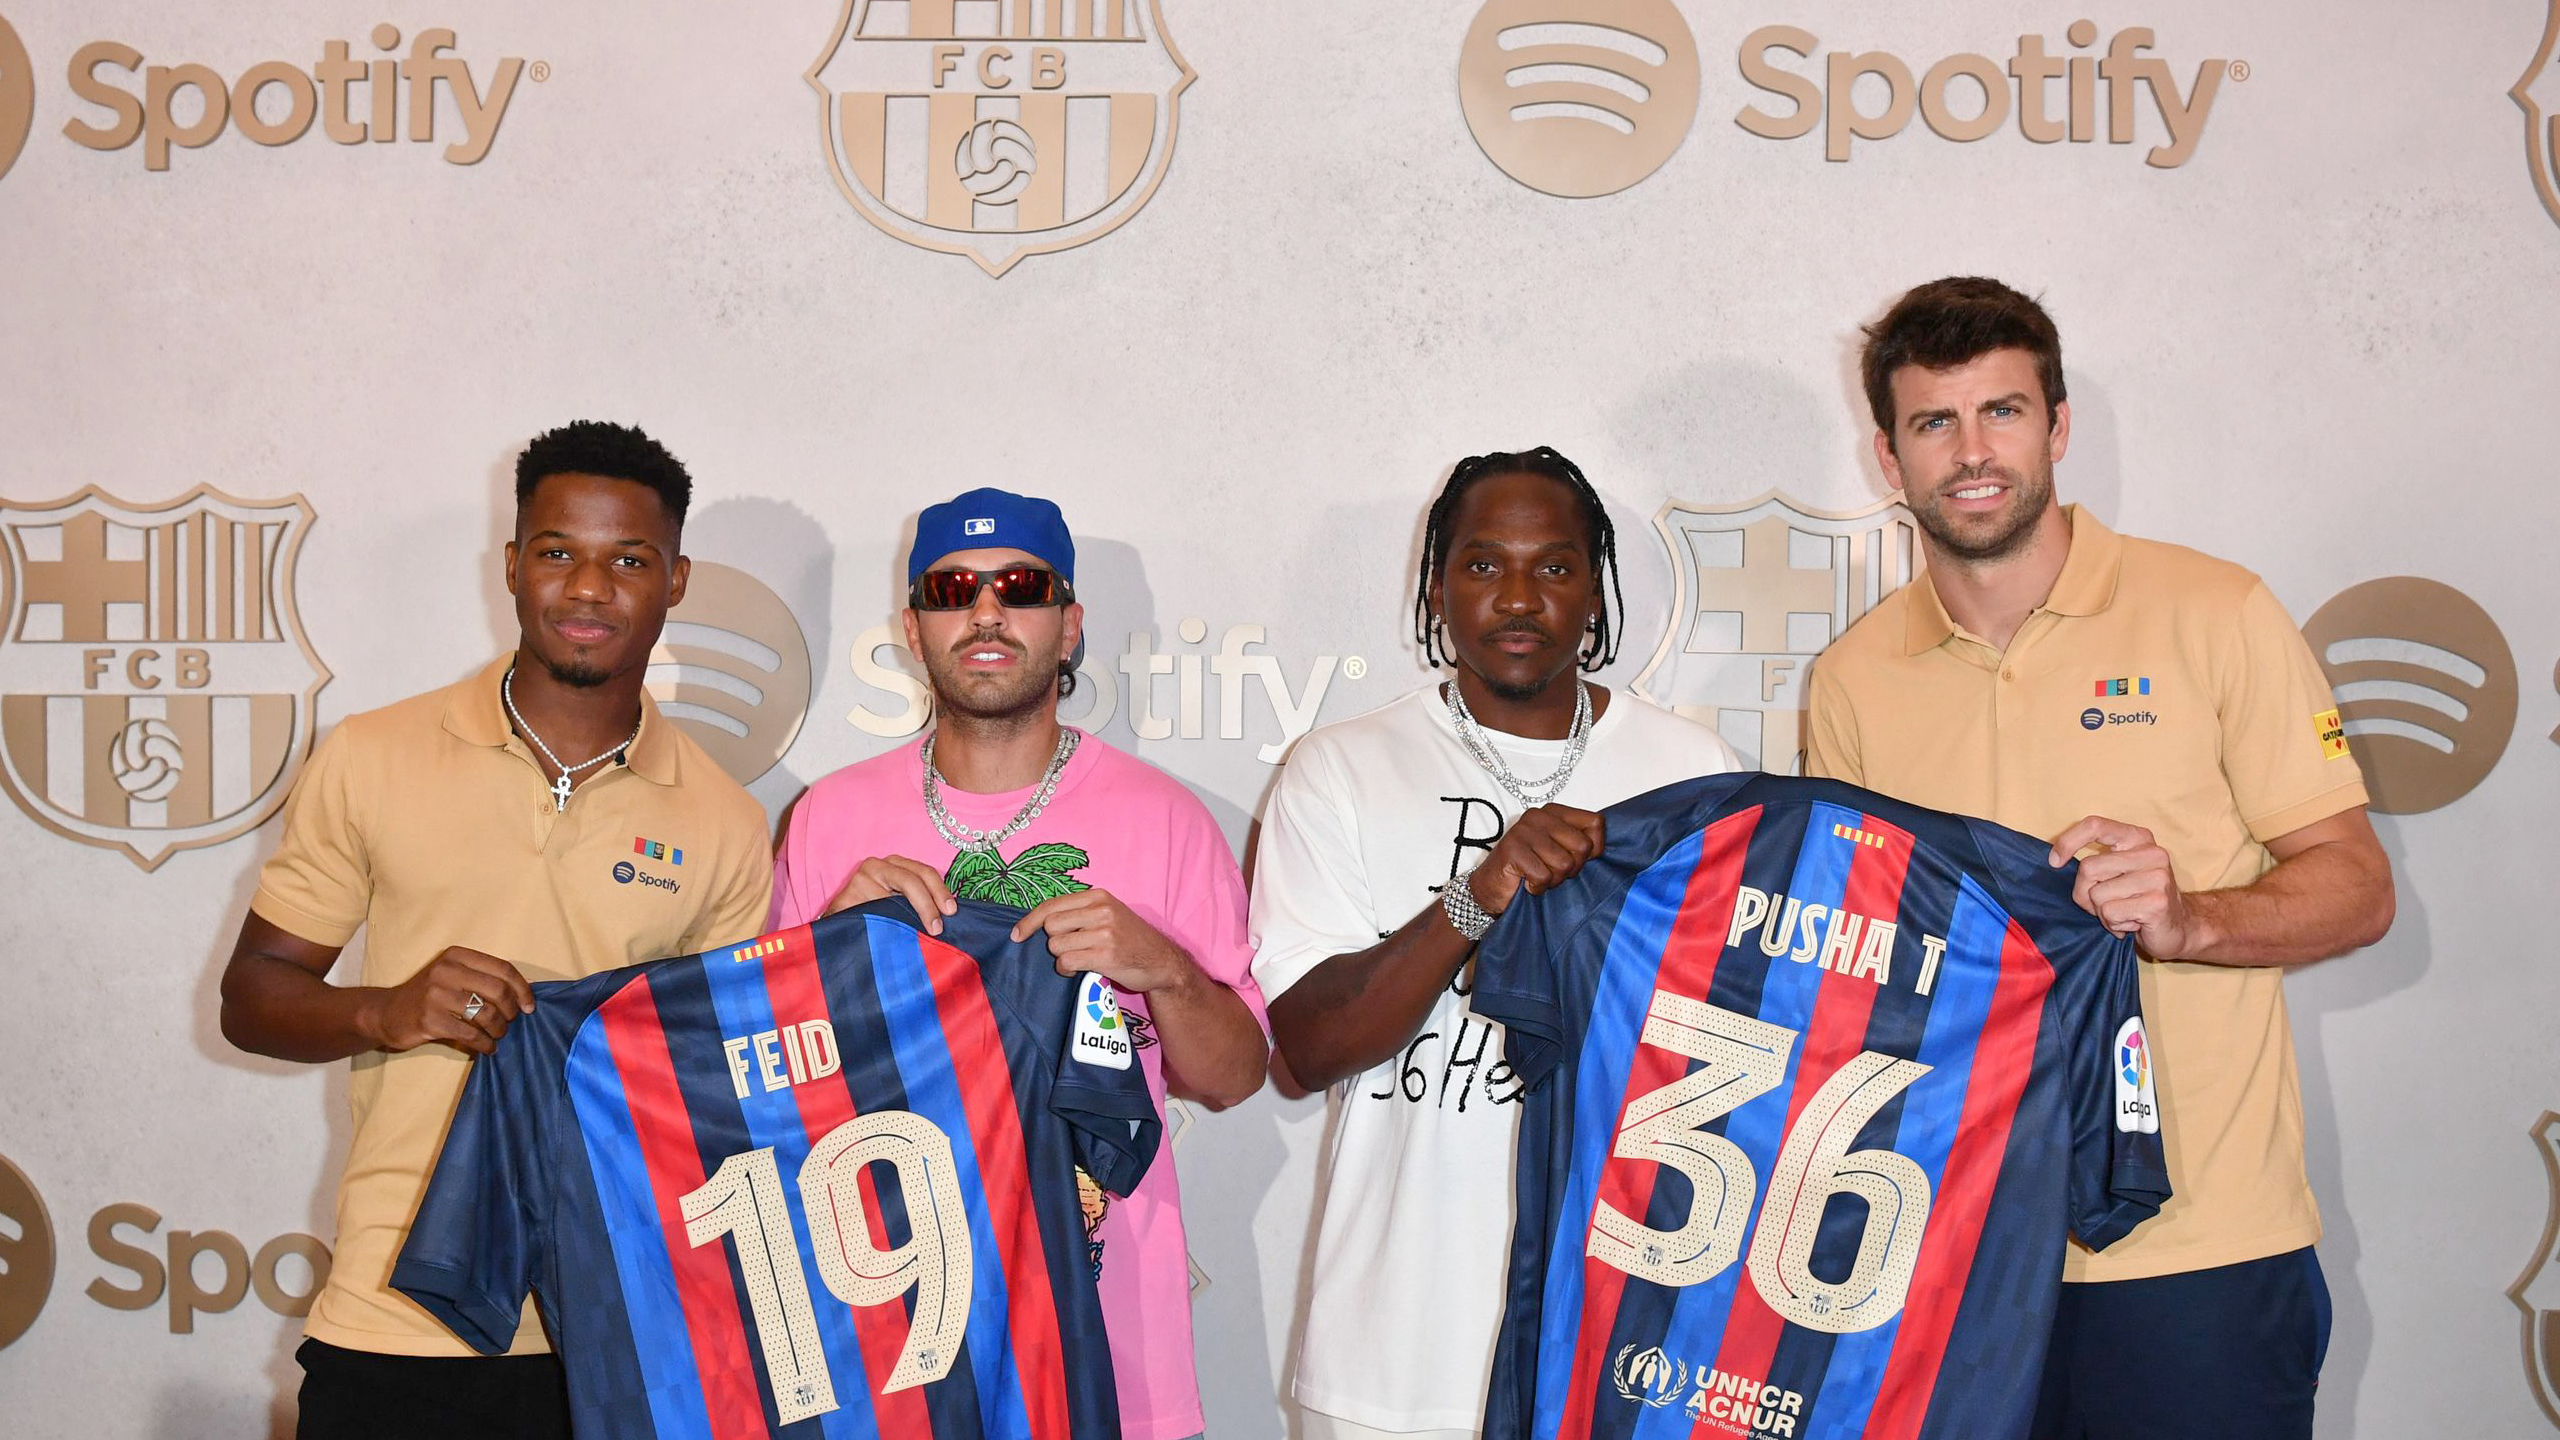 stål tortur kimplante Spotify and FC Barcelona's Partnership Kicks Off in Miami With an Assist  From Pusha T and Feid — Spotify